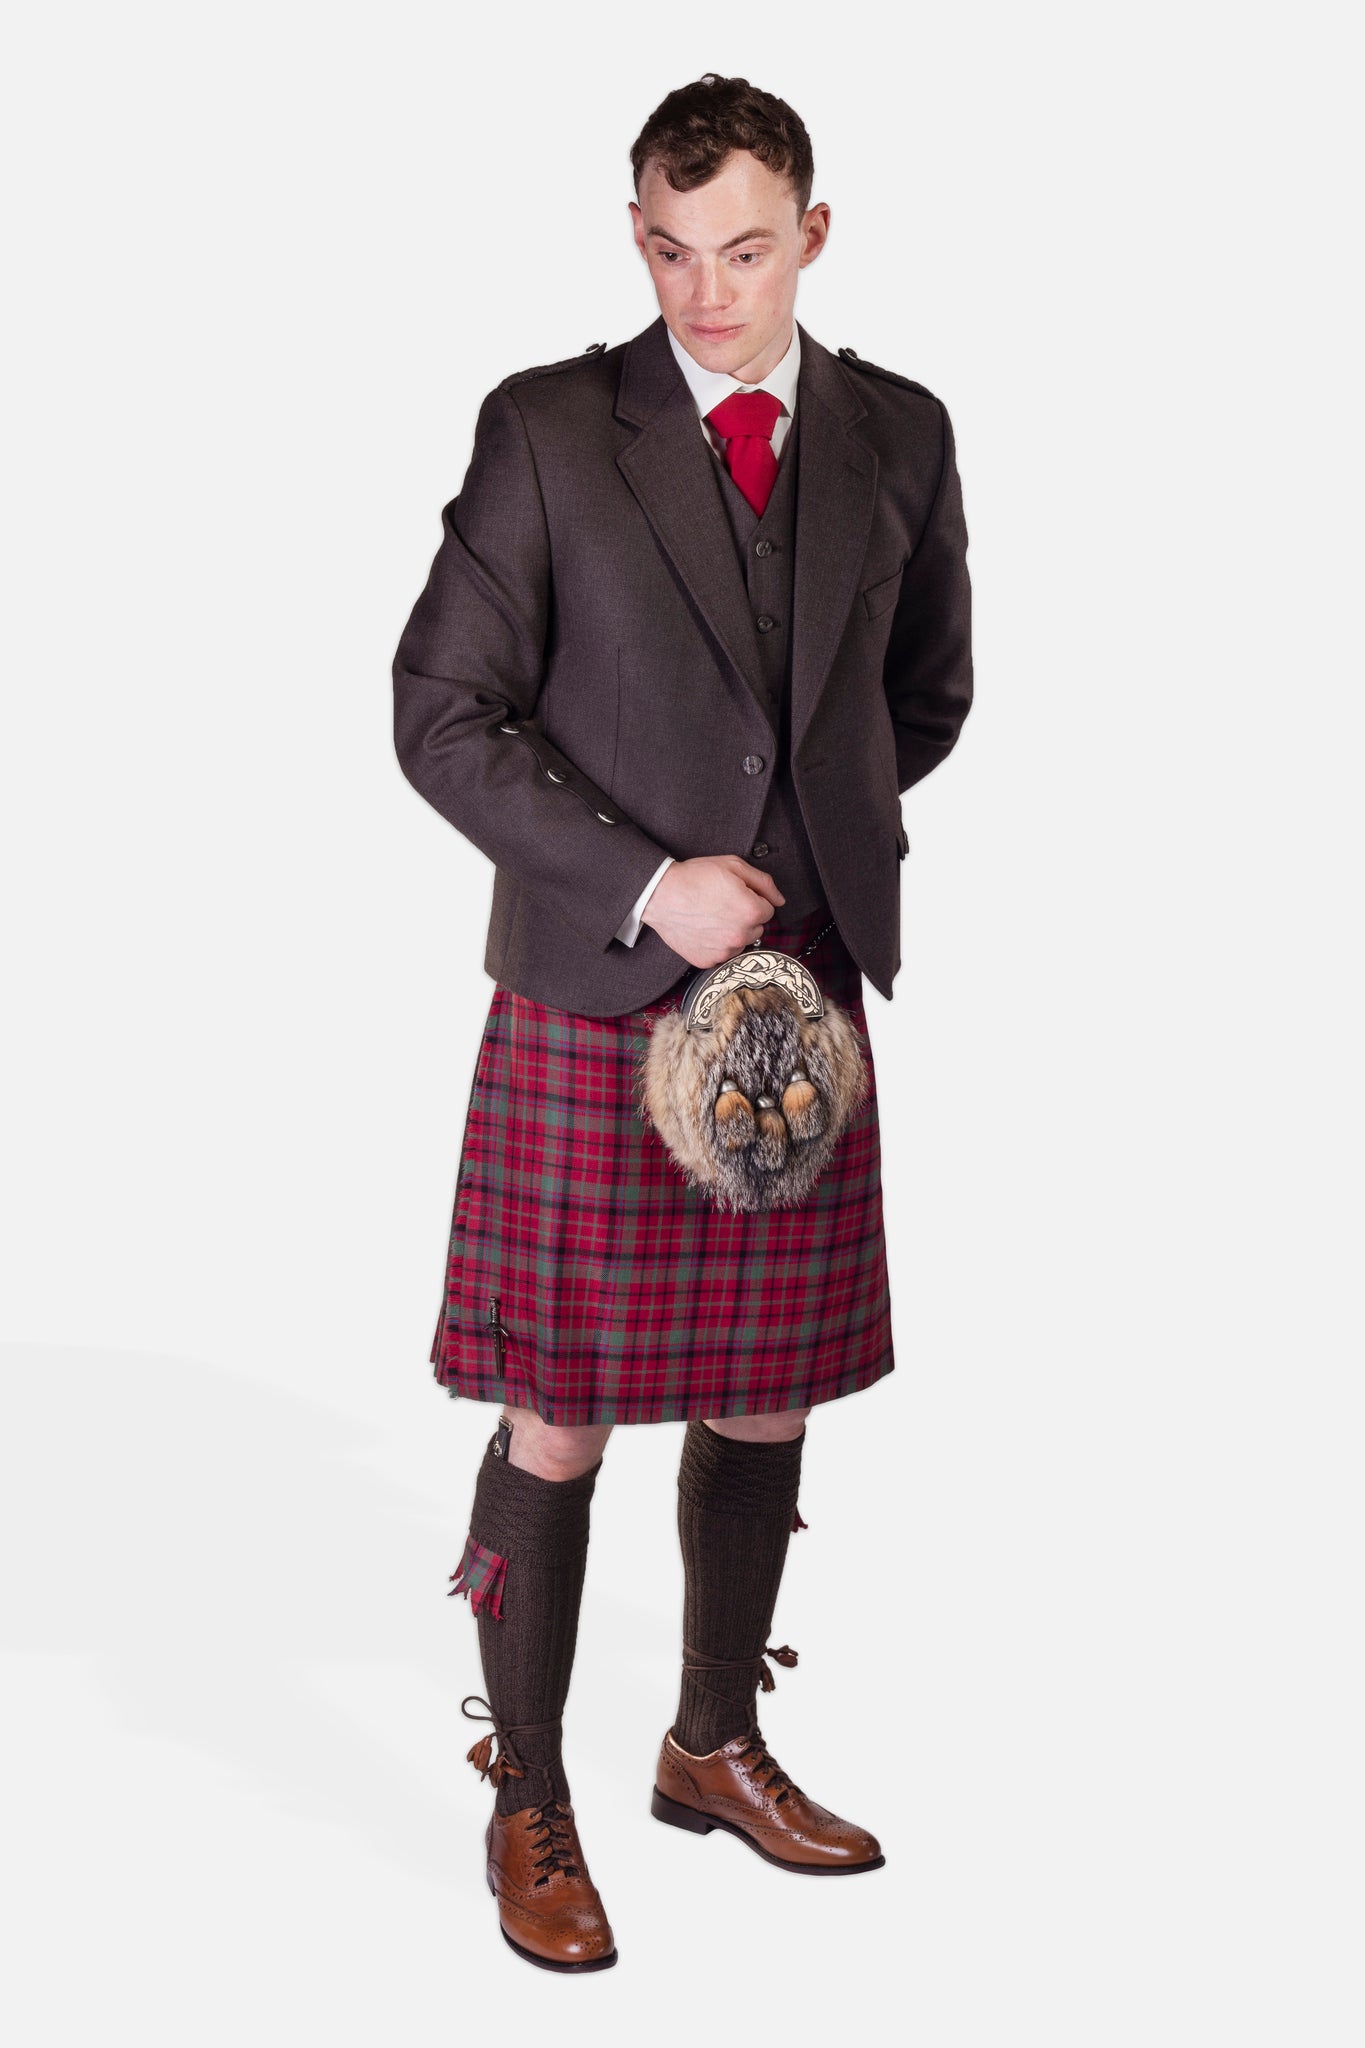 Red Nicolson Muted / Peat Holyrood Hire Outfit